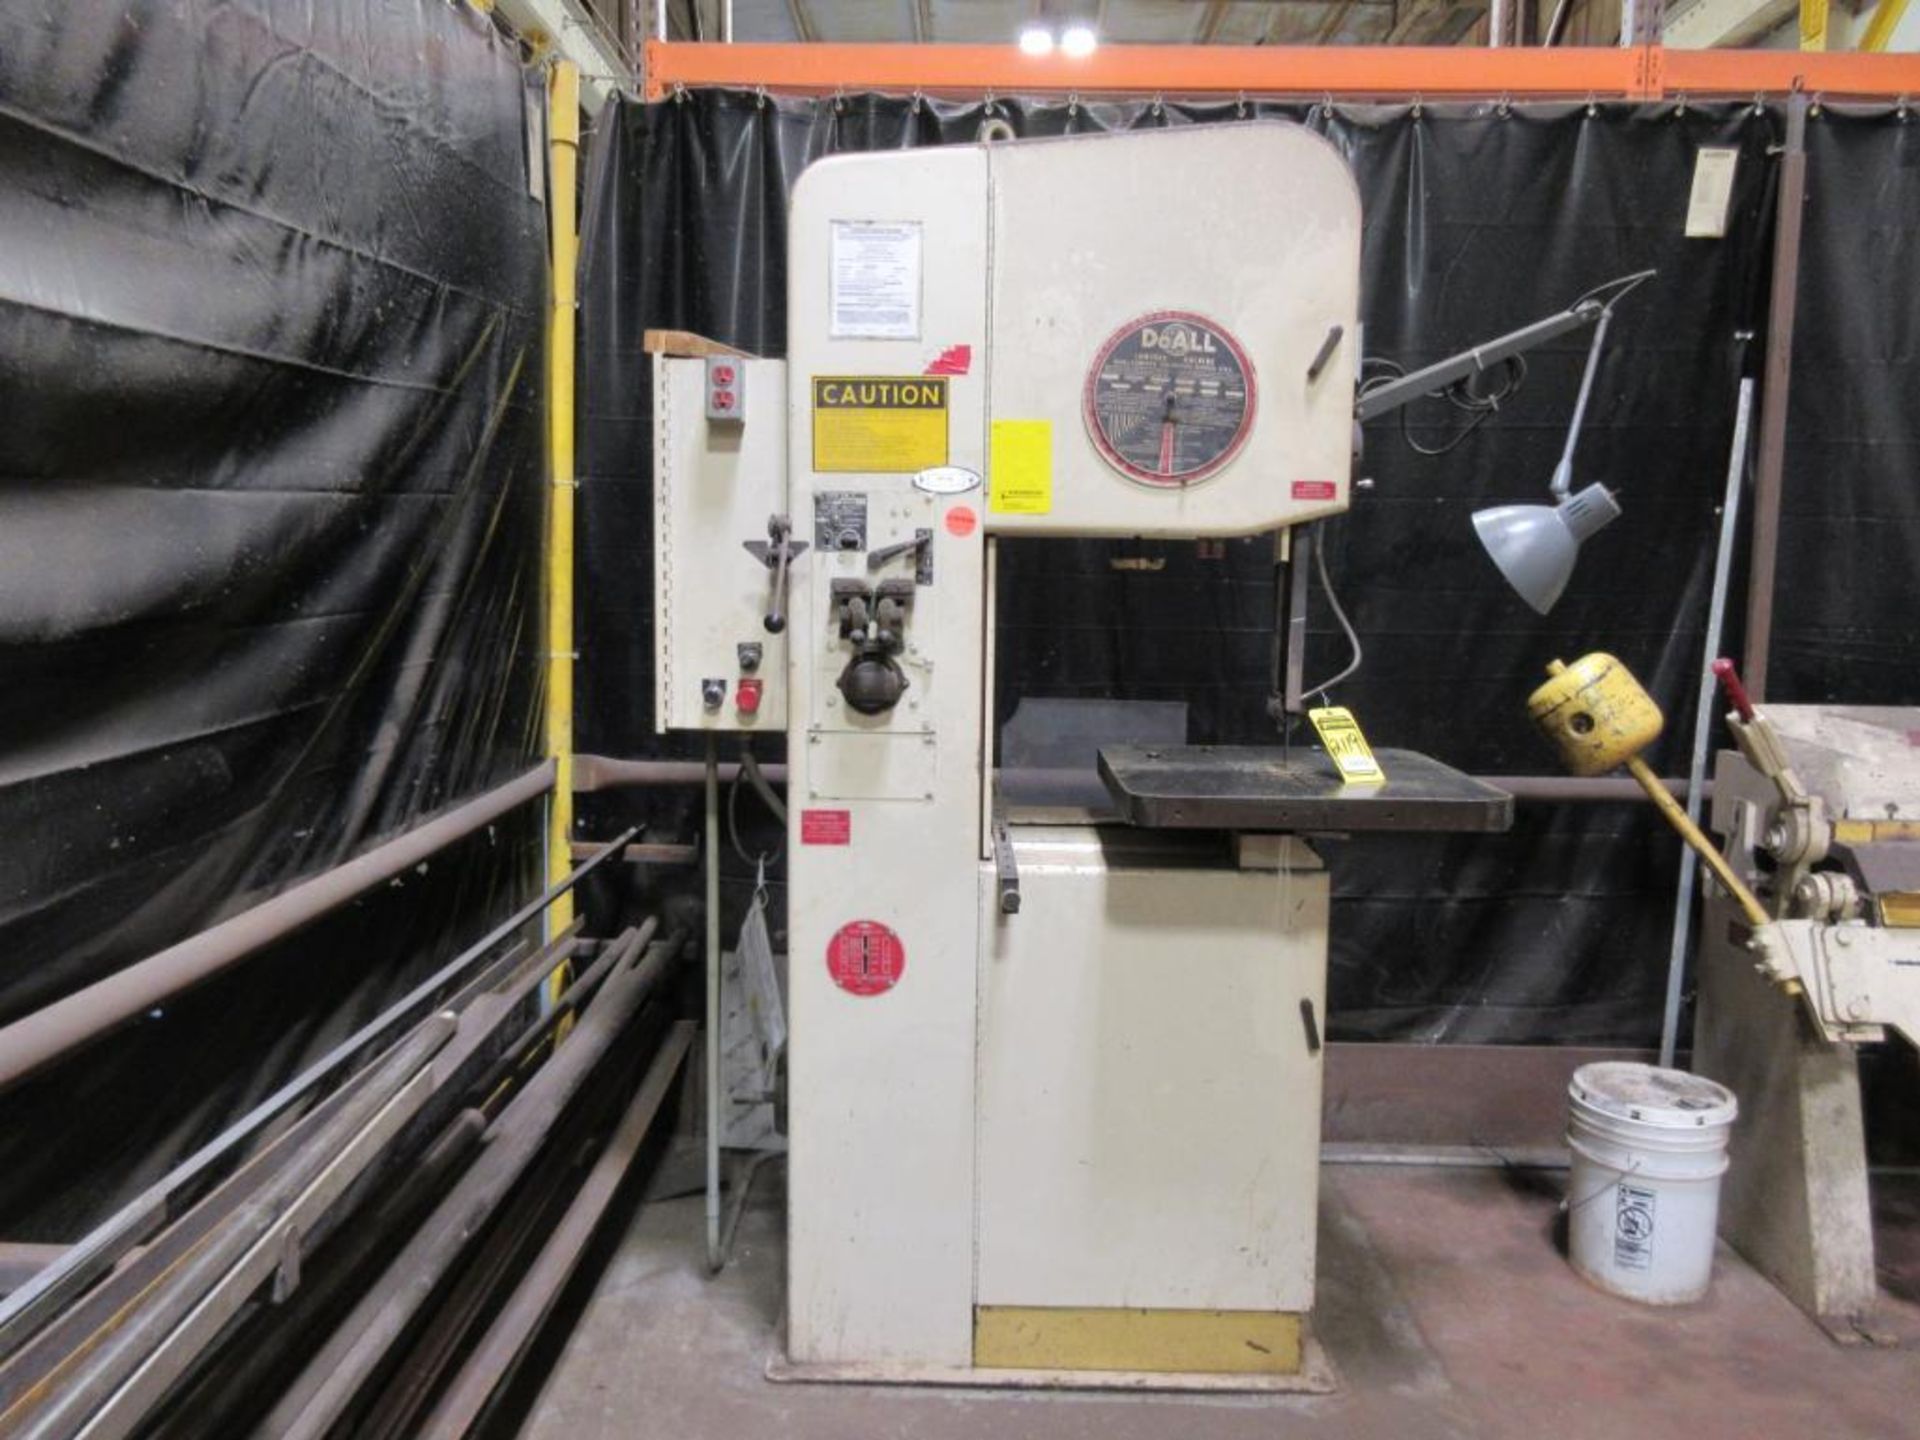 DOALL CONTOUR VERTICAL BAND SAW, W/ DBW-15 BAND WELDER, 154 IN. BAND LENGTH, S/N 399-77330